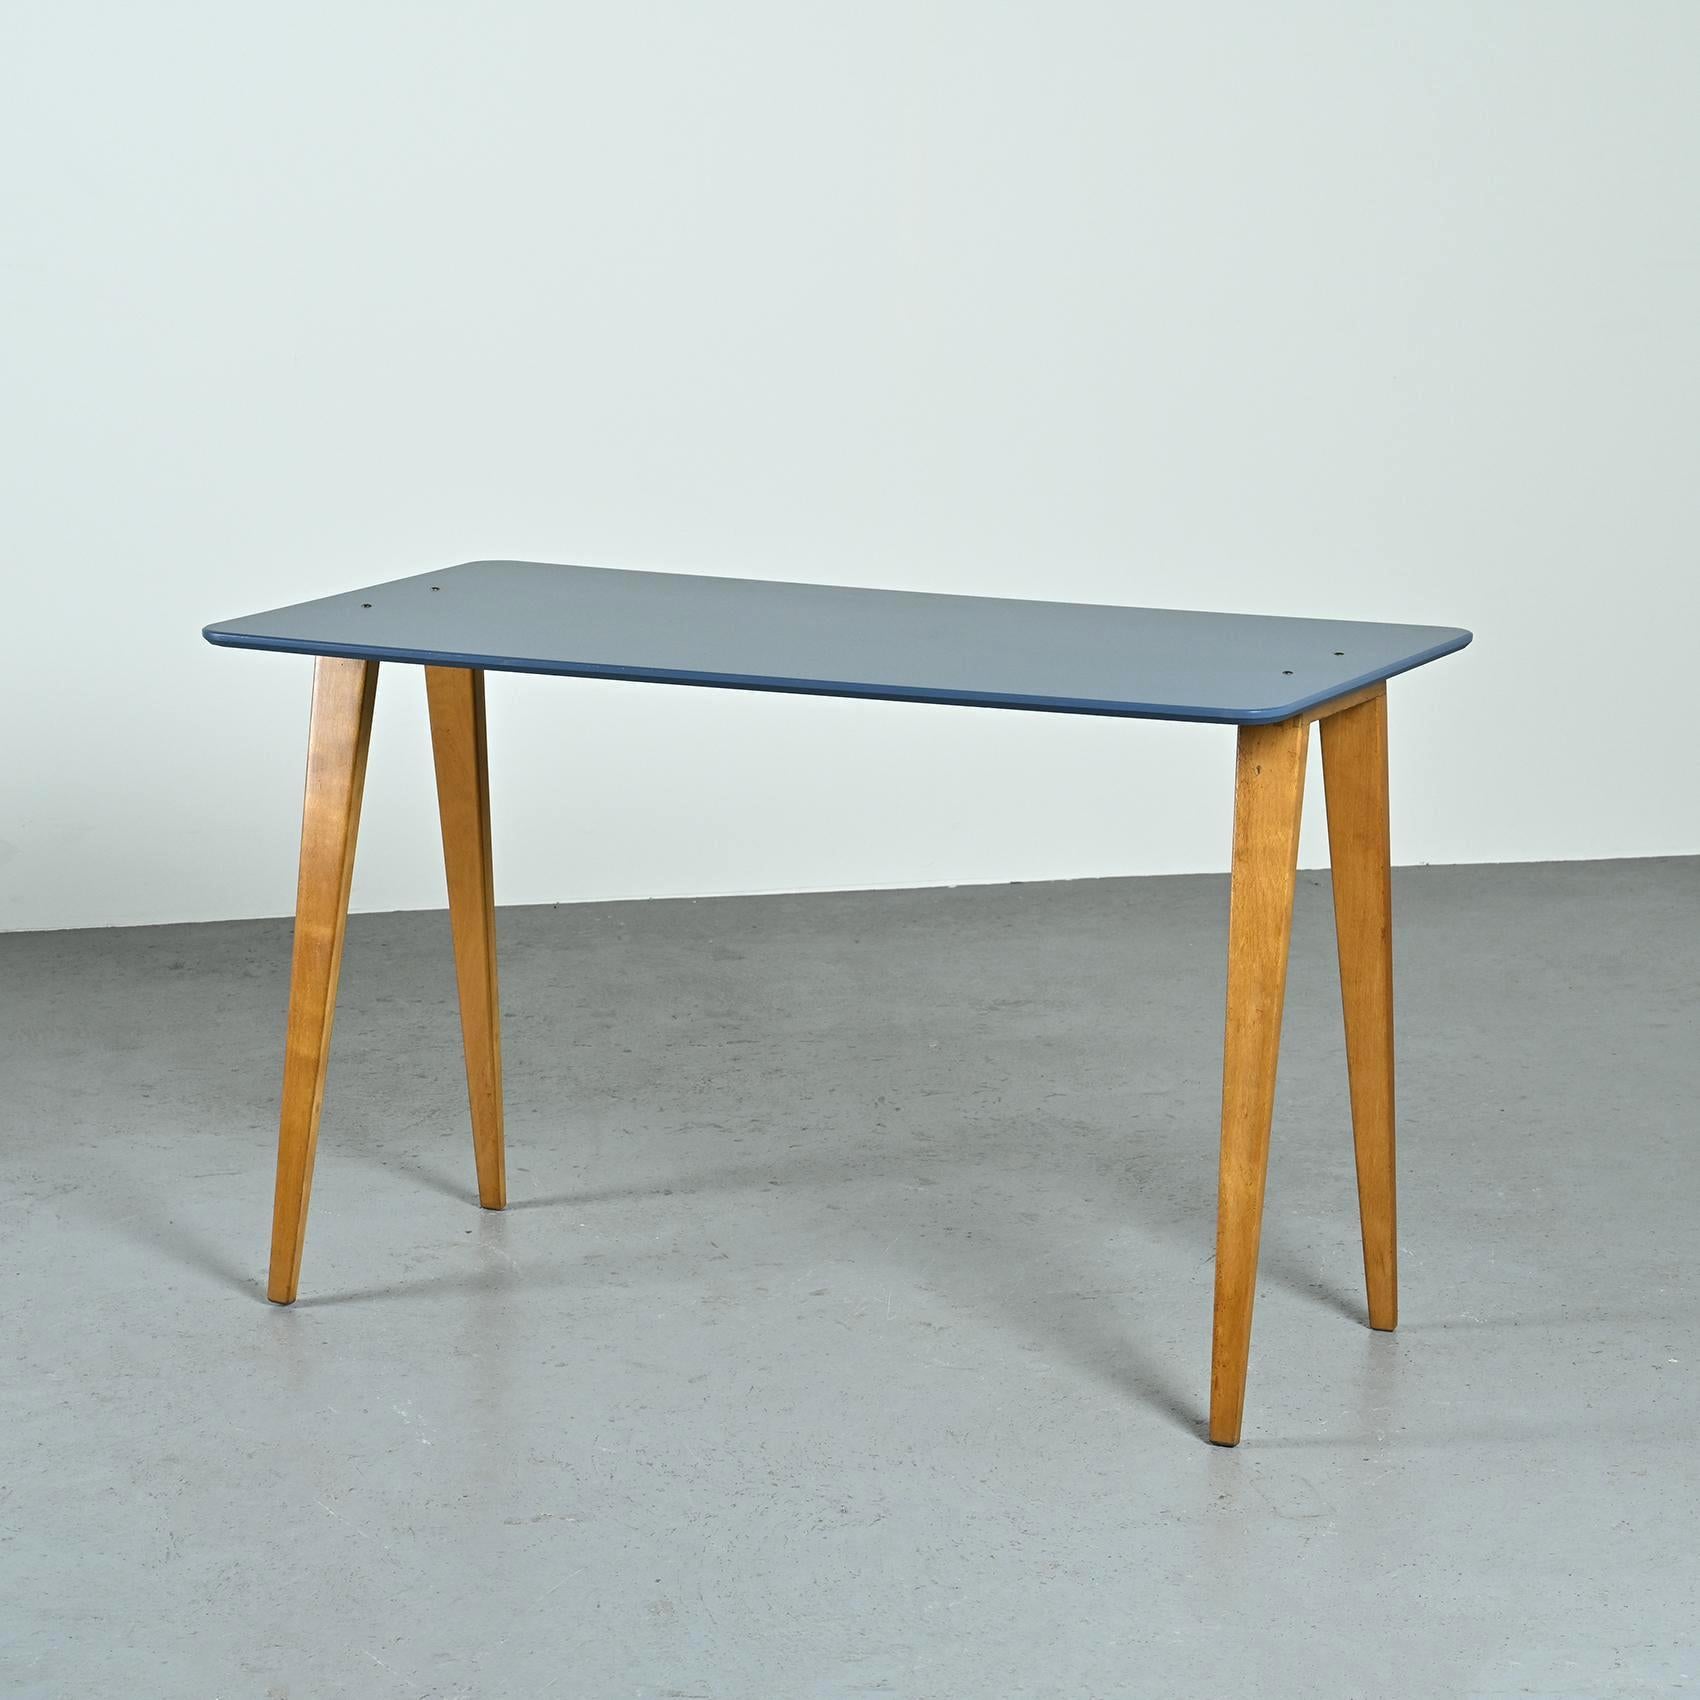 Desk or console by the cabinetmaker and designer from Lyon, André Sornay.

It is composed of an inverted U-shaped base mounted in straight tails on which rests a blue lacquered ash top which has been restored. Its versatile design allows it to be